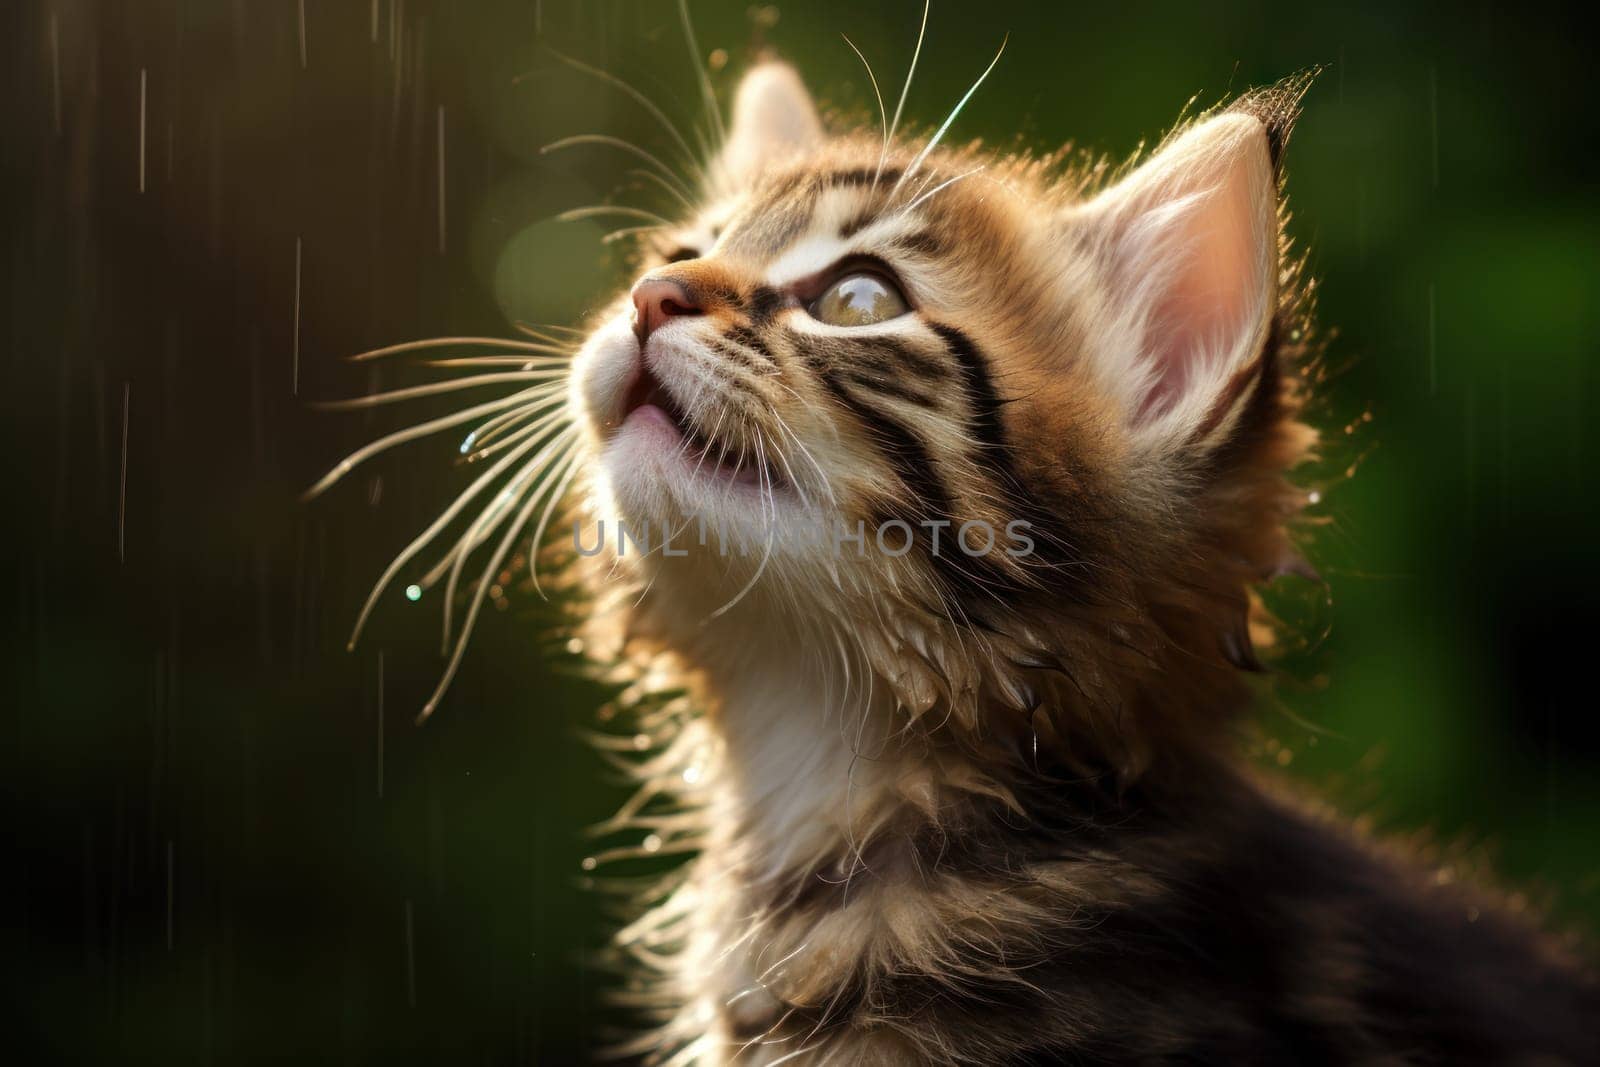 A kitten with floppy ears trying to catch the raindrops with its tongue by nijieimu